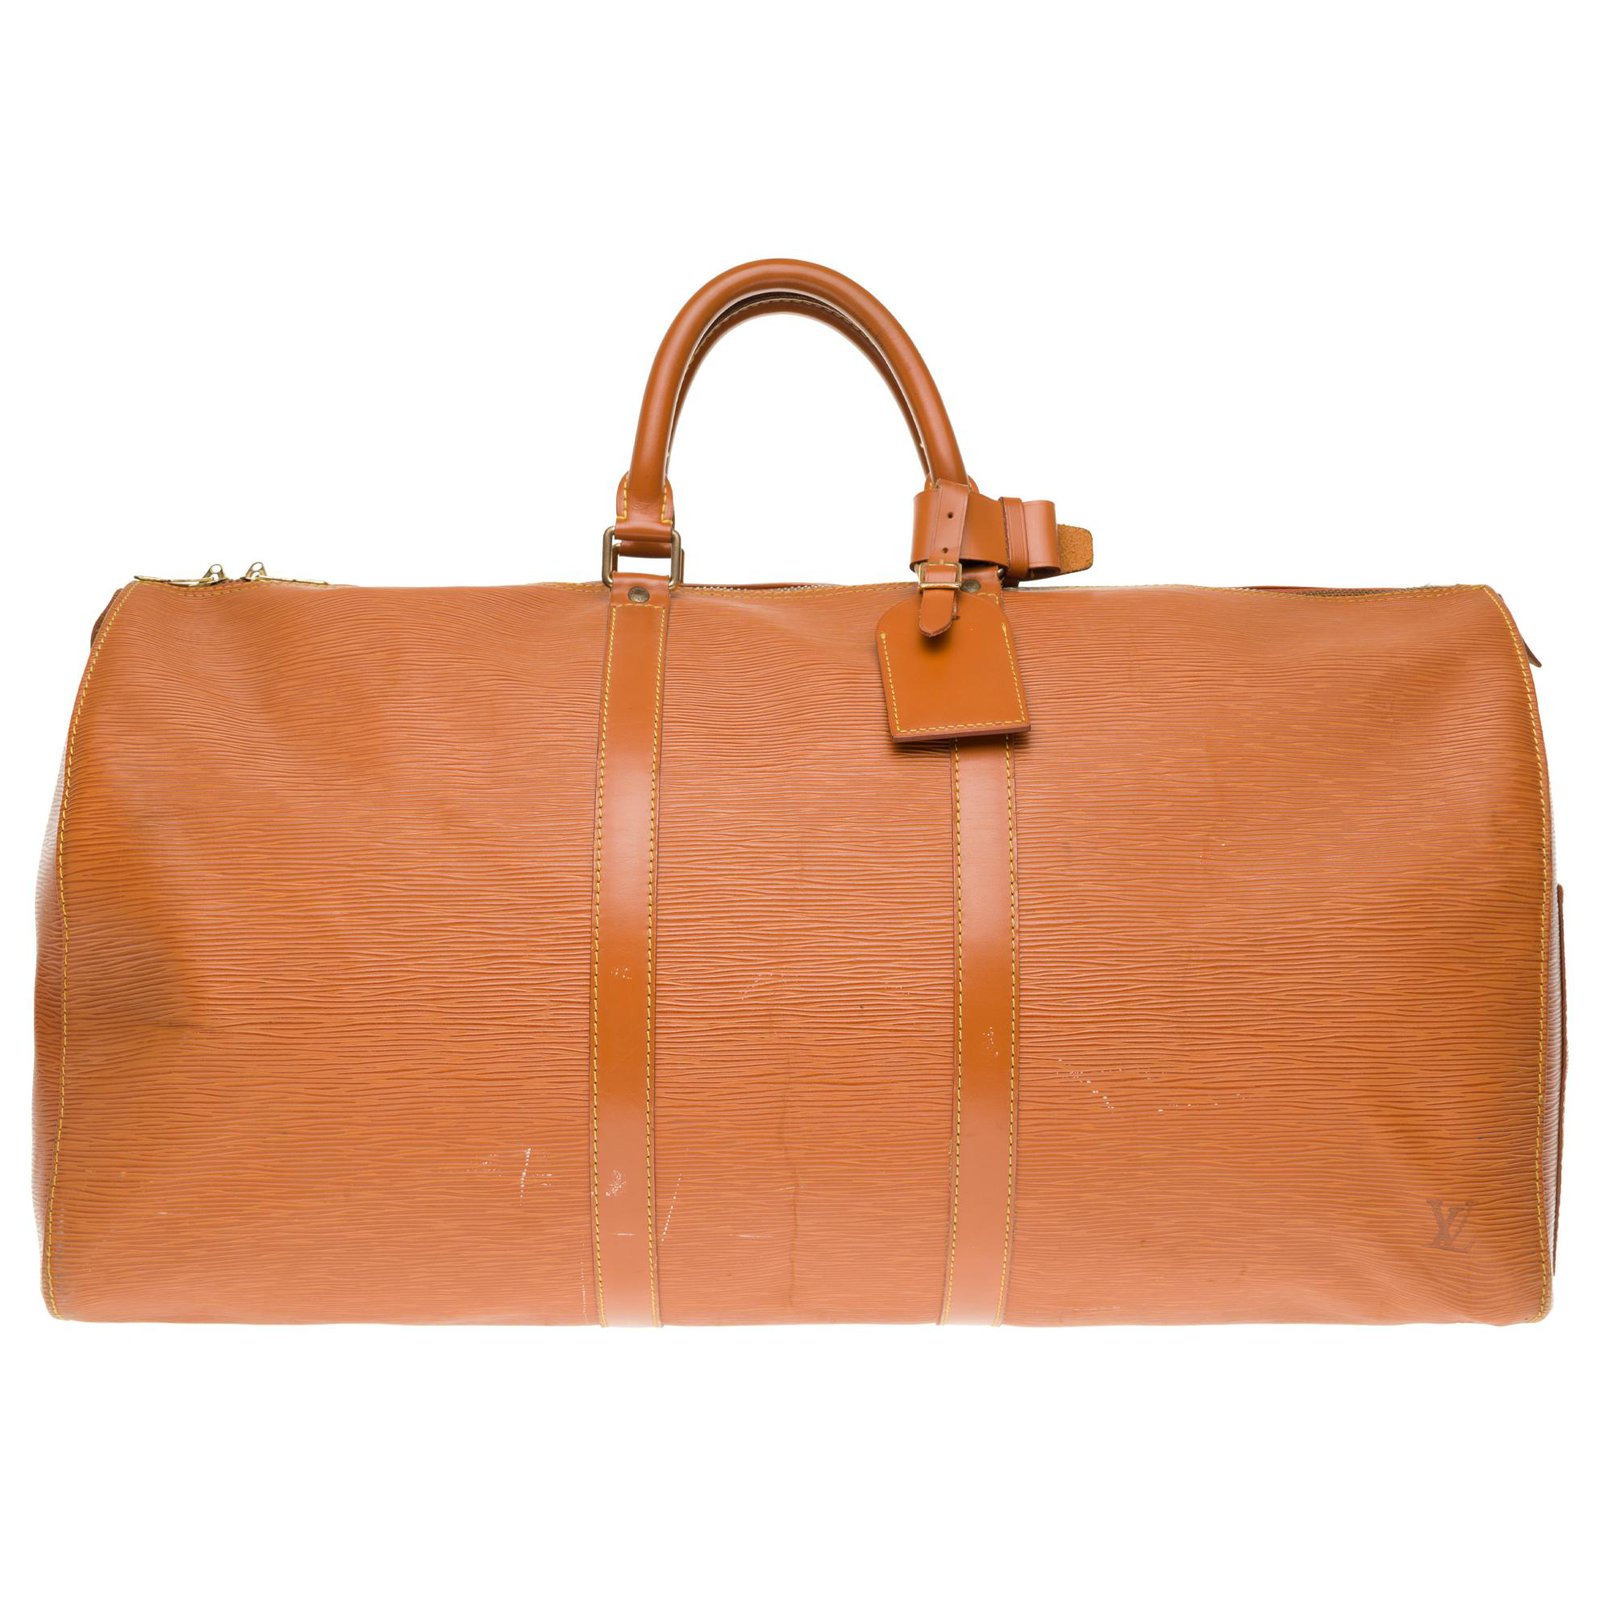 Louis Vuitton Keepall Travel Bag 55 in cognac epi leather ref